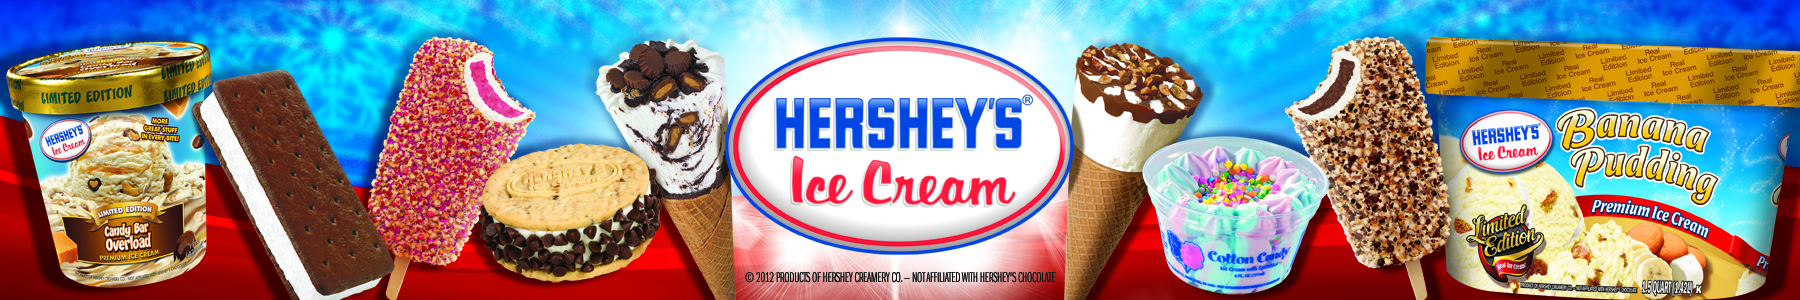 Hershey Creamery Products